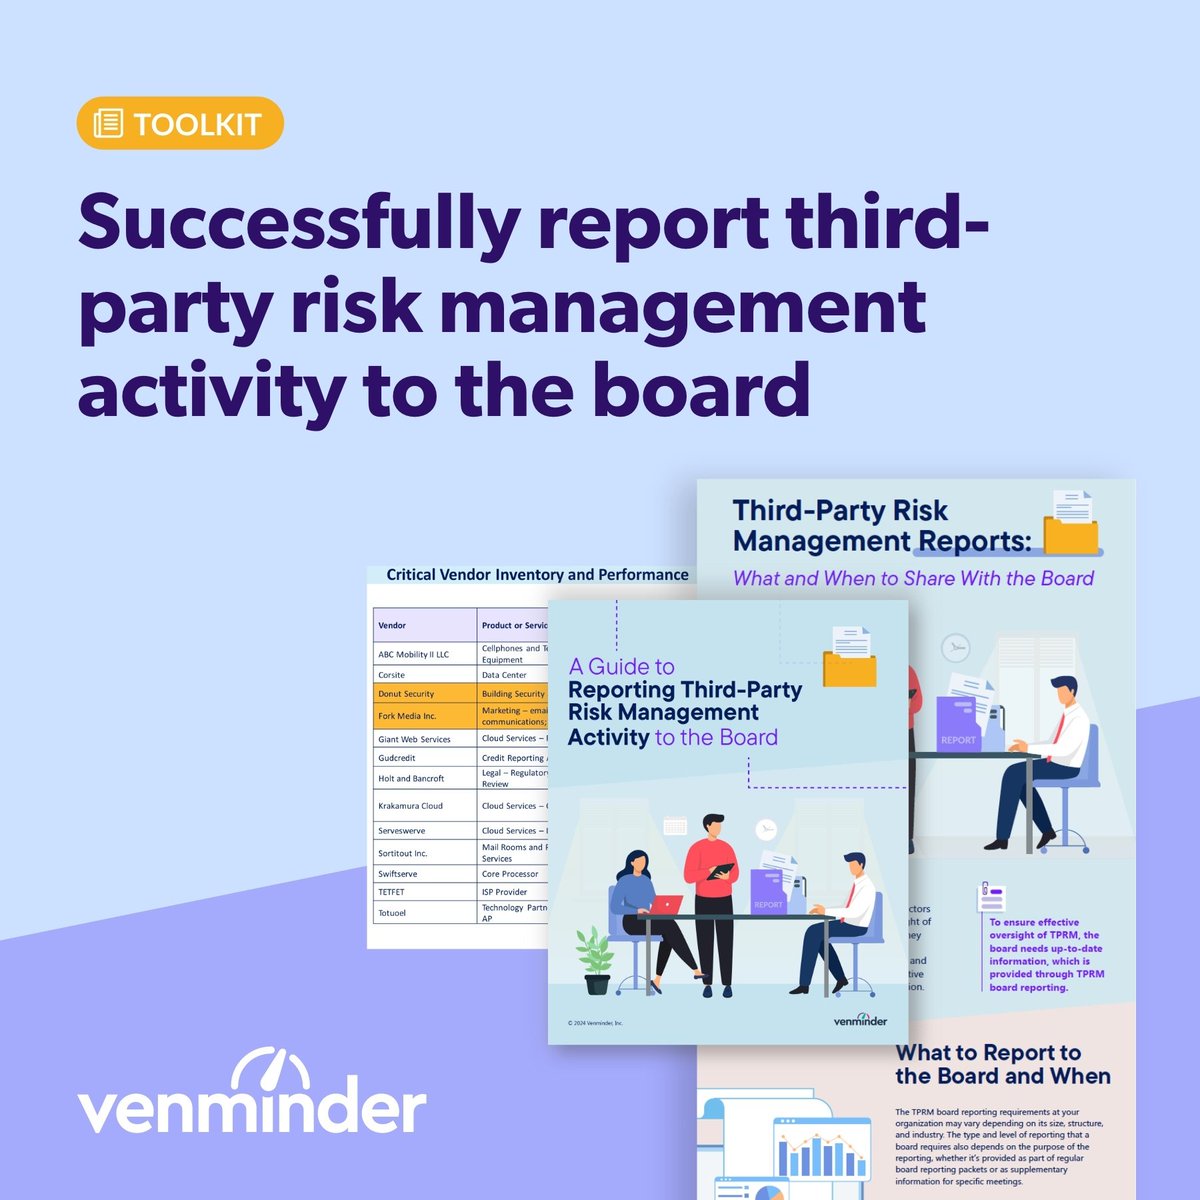 For effective oversight of TPRM, the board must have access to up-to-date and accurate information on third-party risks, compliance issues, and #TPRM performance: hubs.ly/Q02z5sMV0 This powerful toolkit includes an infographic, eBook, templates, and examples.